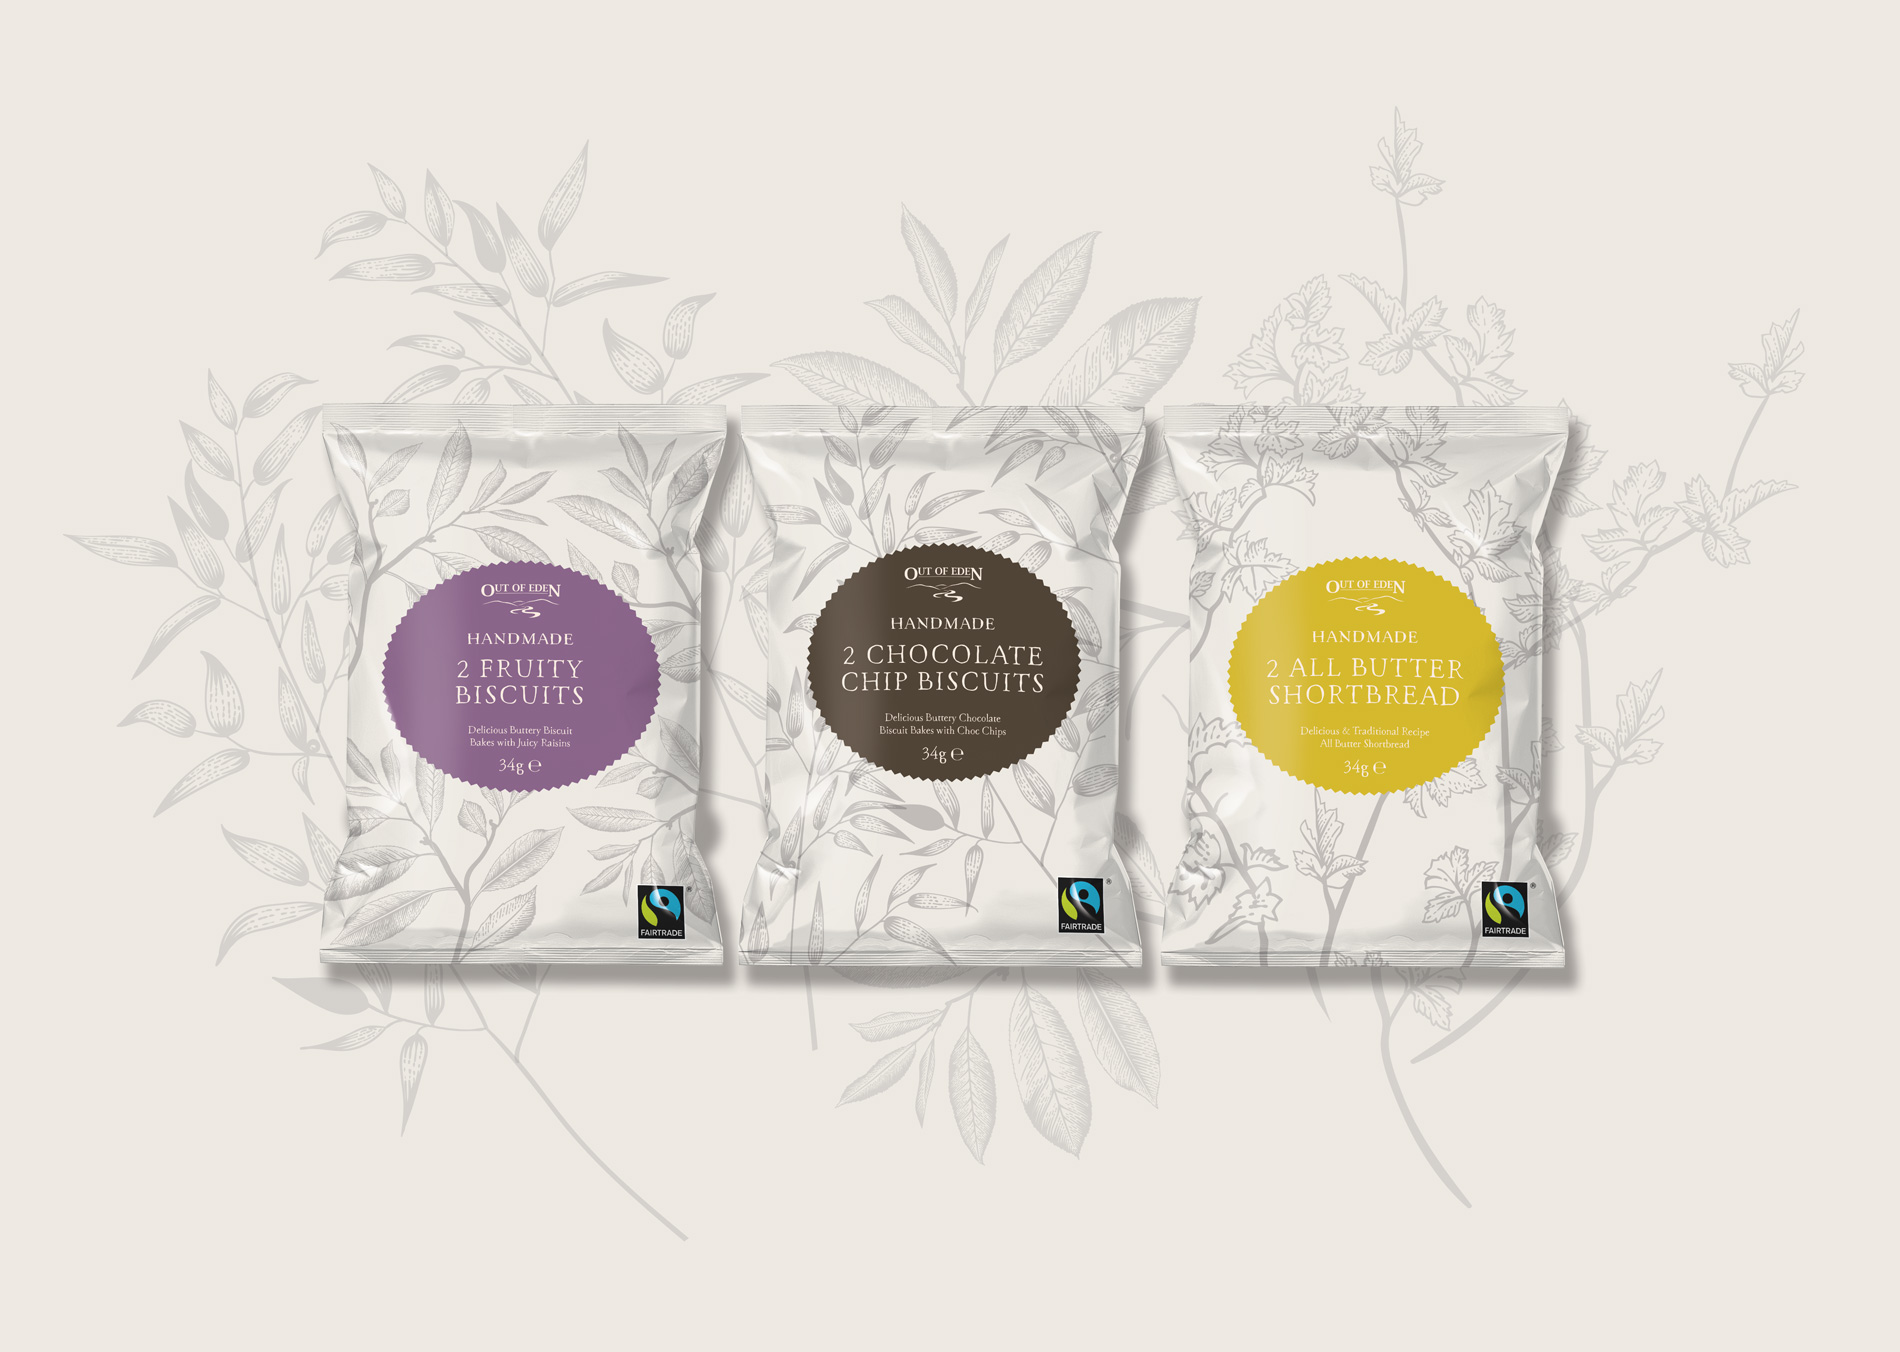 Out of Eden - Biscuit Packaging Design Concepts